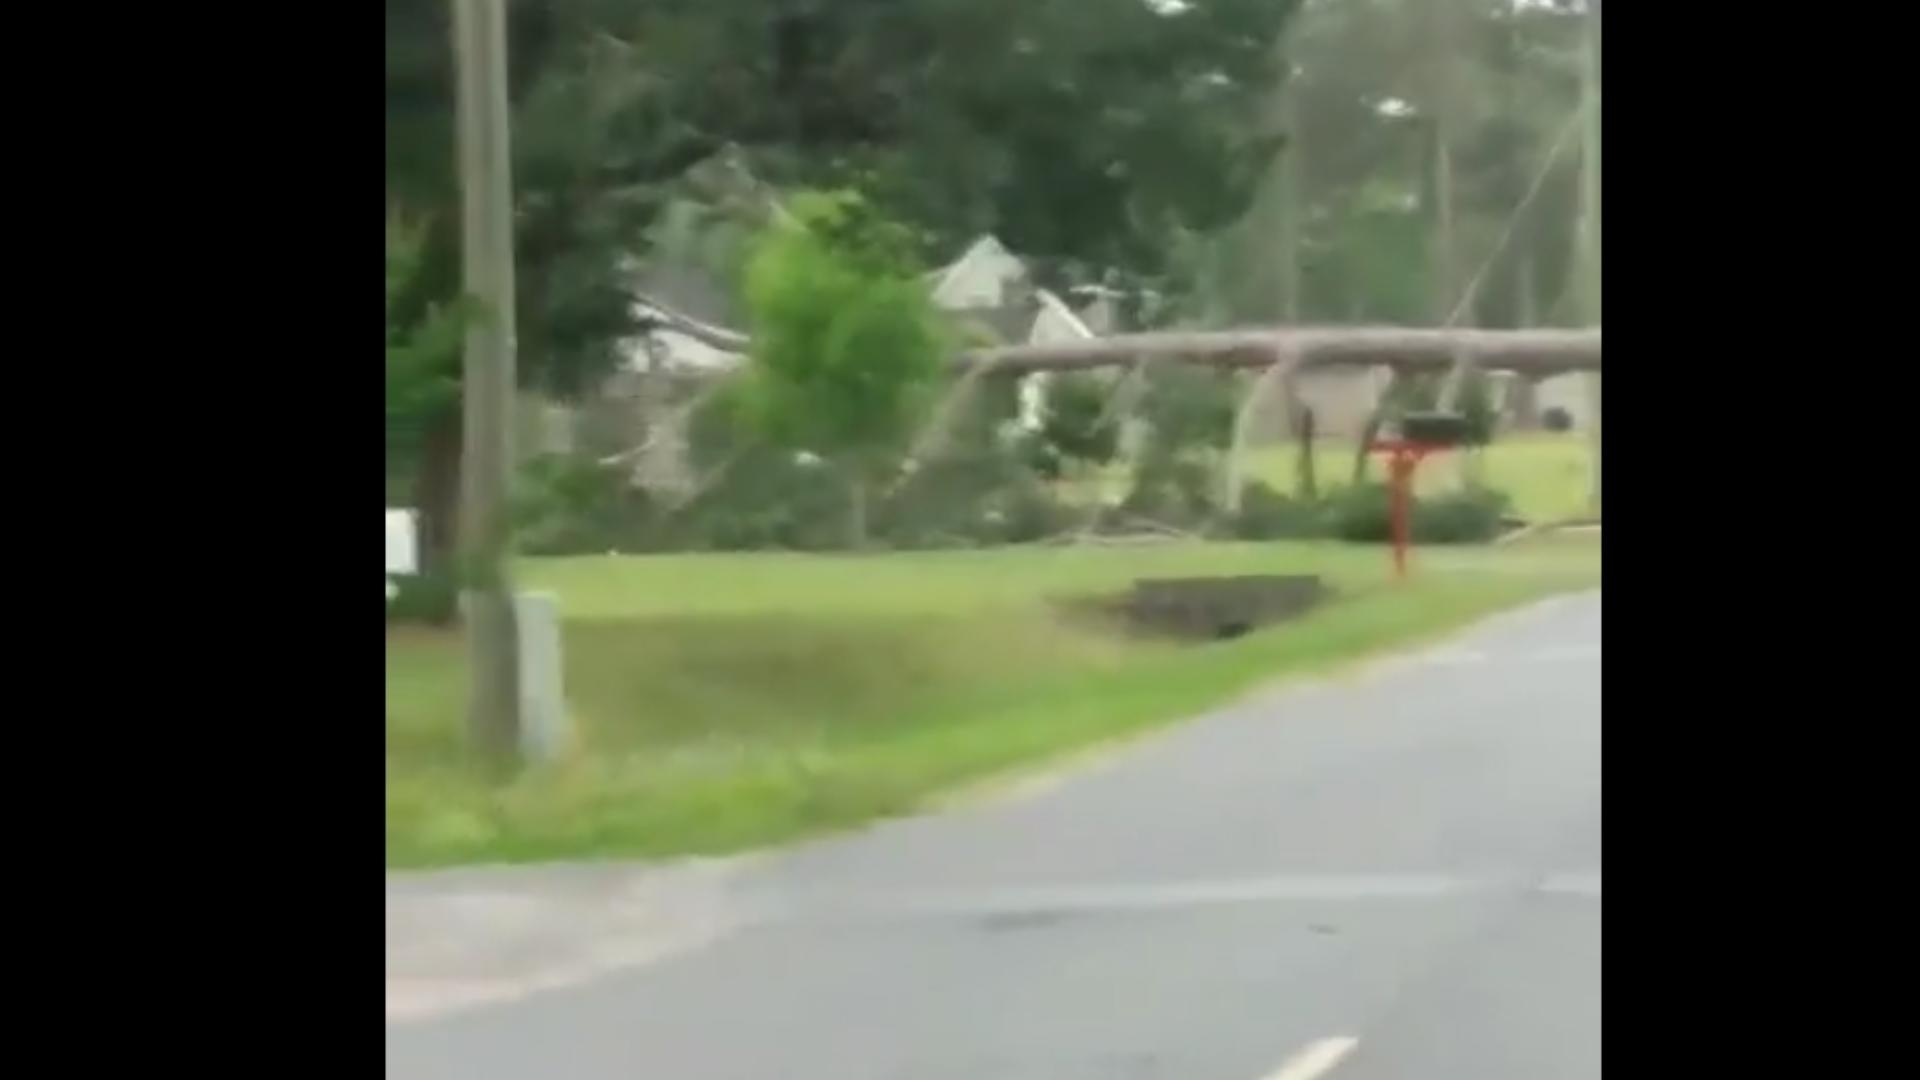 This tree fell down in Waycross, Georgia during severe weather Thursday.